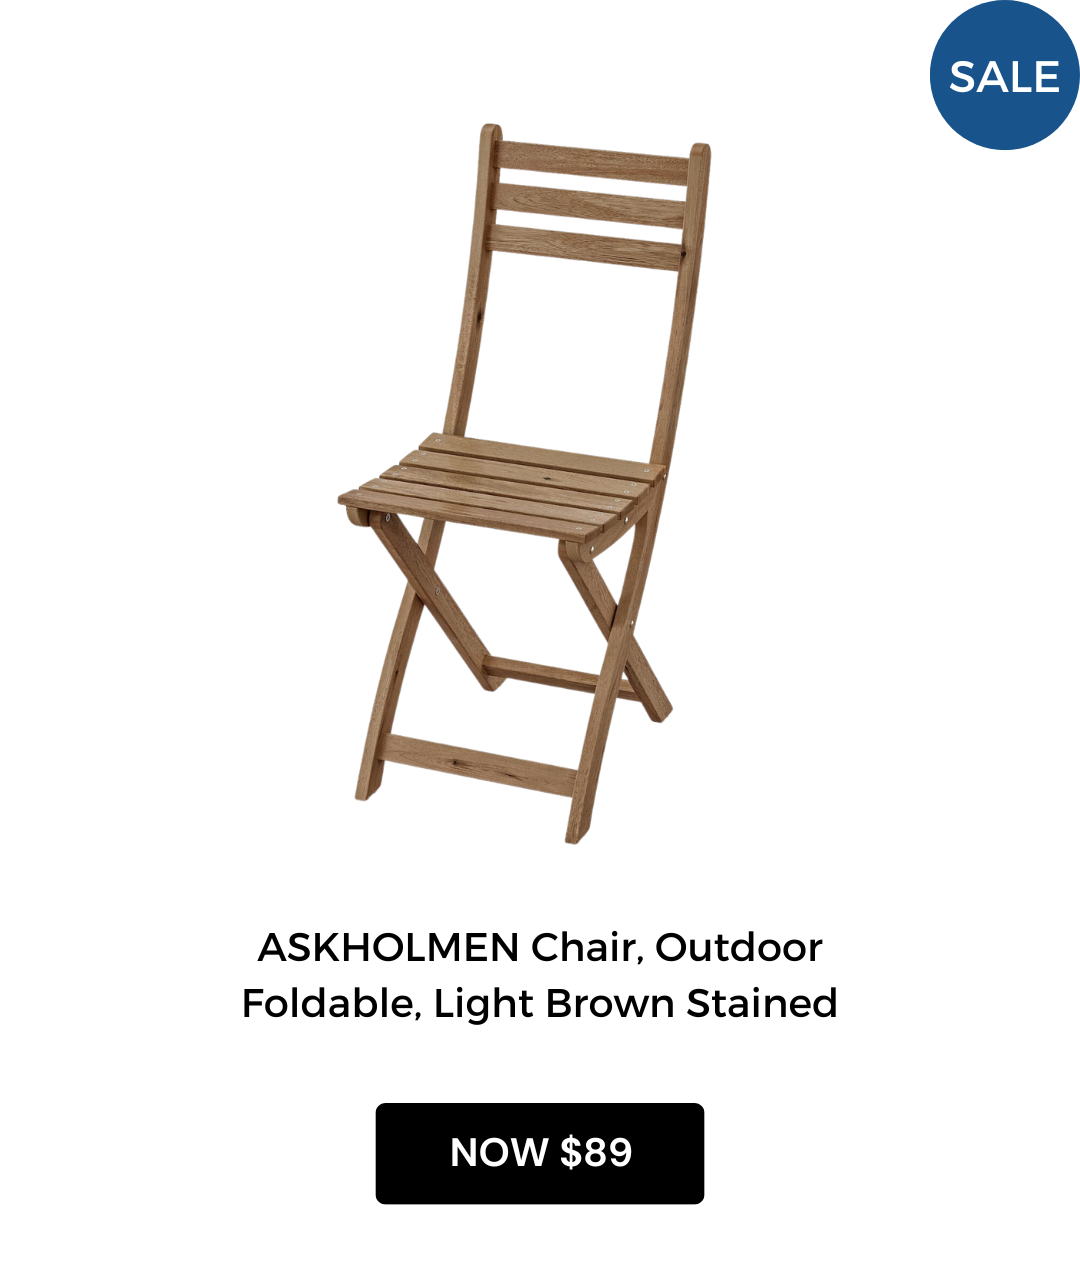 ASKHOLMEN Chair, Outdoor Foldable, 36x49x87cm, Light Brown Stained